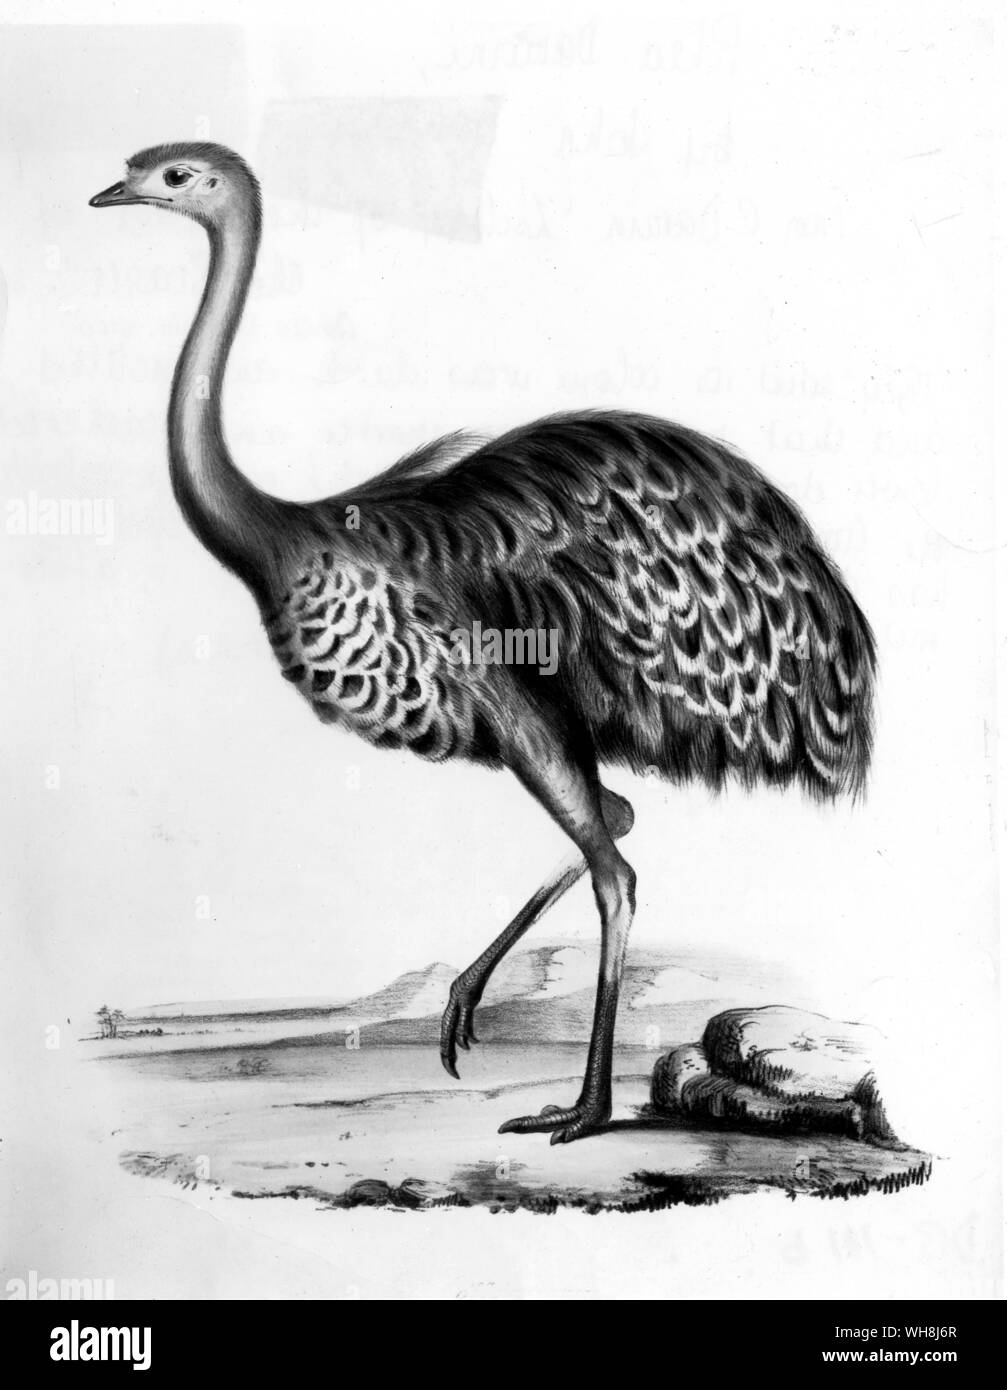 Rhea darwini. Darwin was told of this rare species by the Gauchos: 'they said its colour was dark and mottled and that its legs were shorter and feathered lower down than those of the common ostrich ... Mr Gould in describing this new species, has done me the honour of calling it after my name.' (Quote). From Darwin and the Beagle by Alan Moorhead, page 111. Stock Photo